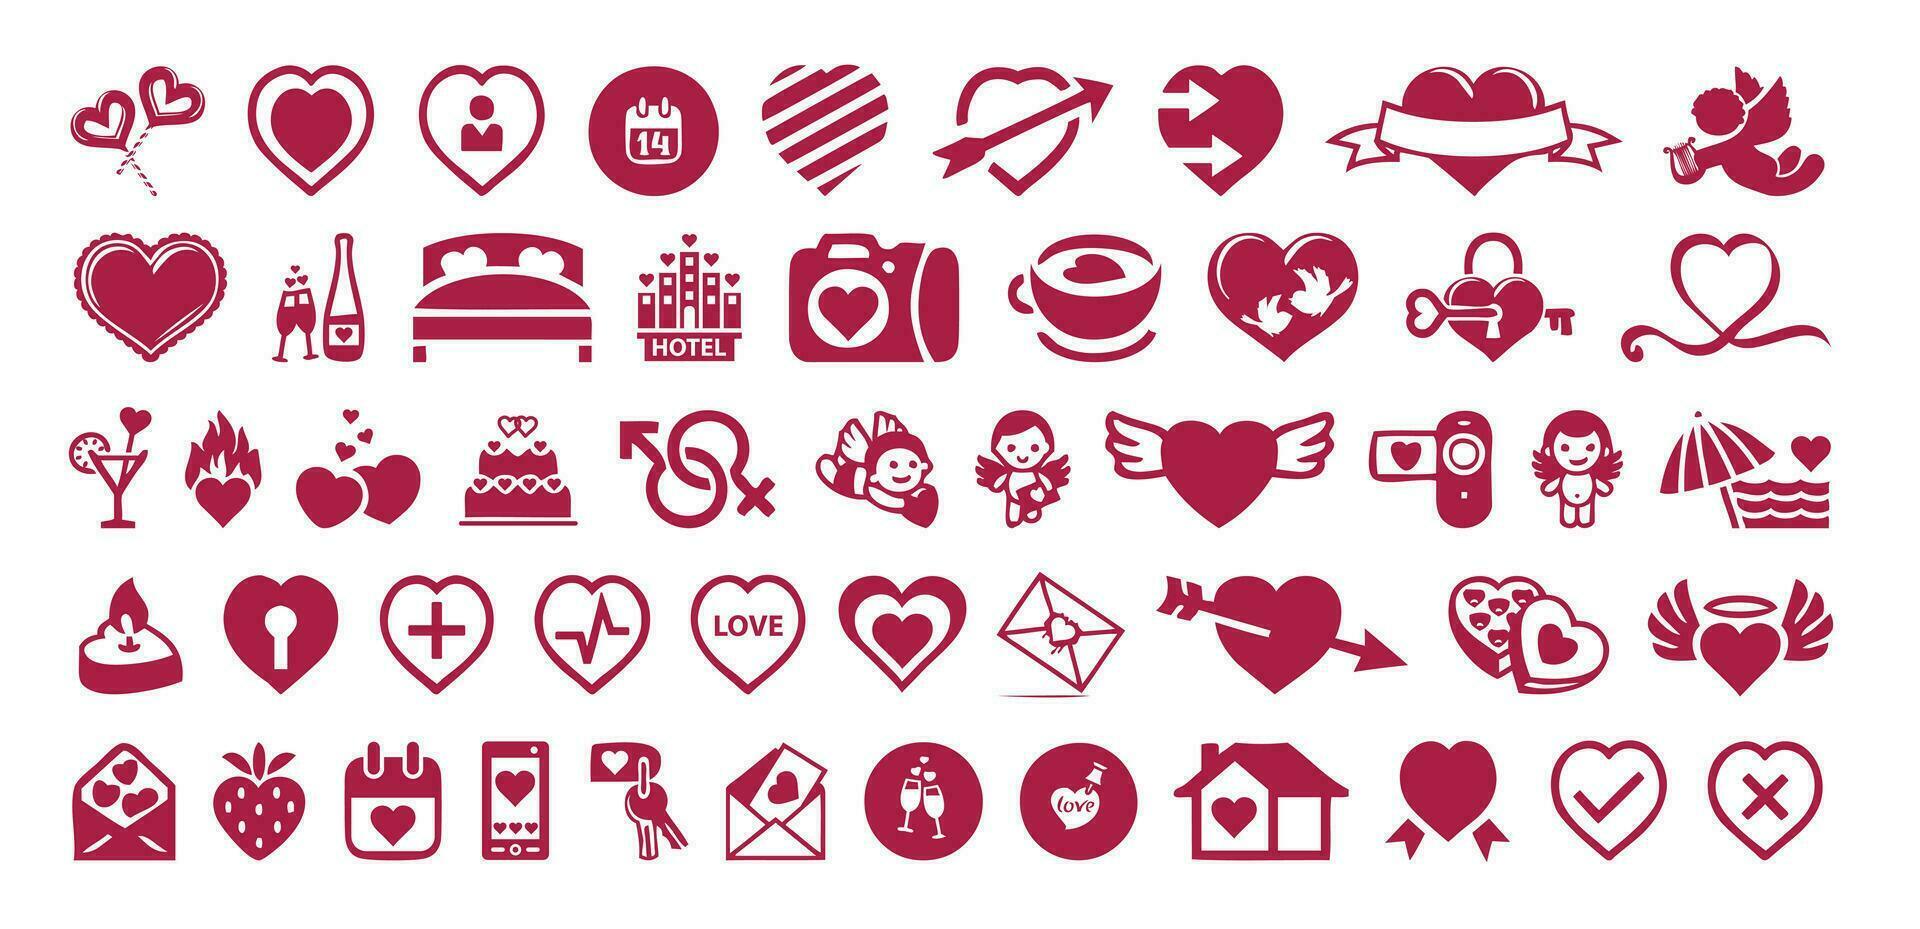 Big collection of Valentine's day icons set. Red and white symbols. Vector illustration.